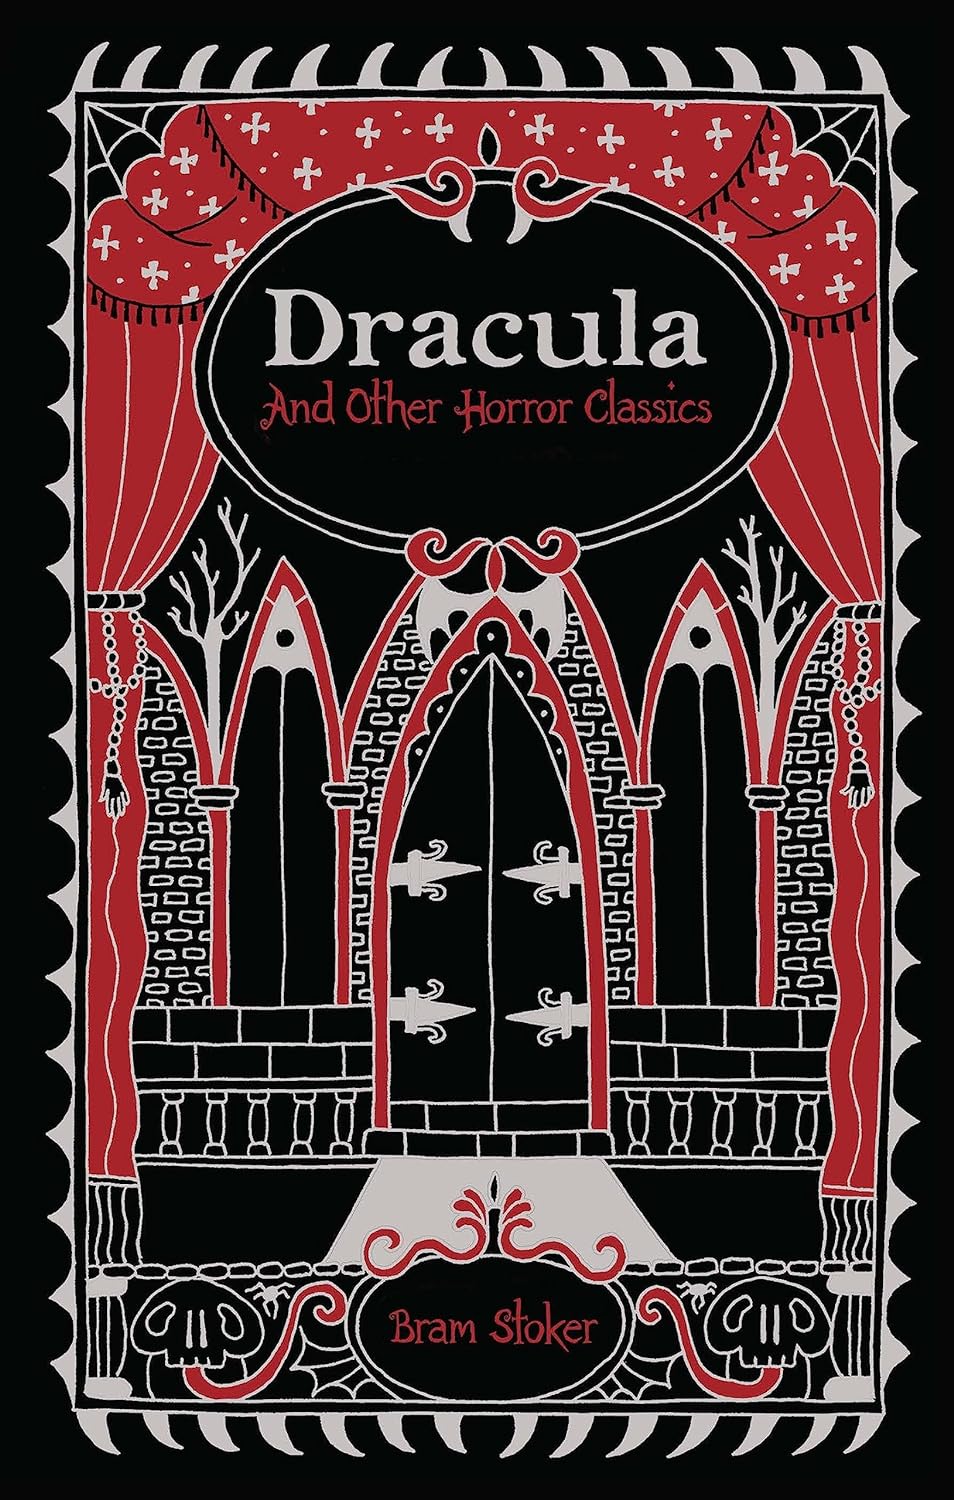 Dracula and Other Horror Classics (Barnes & Noble Omnibus Leatherbound Classics)